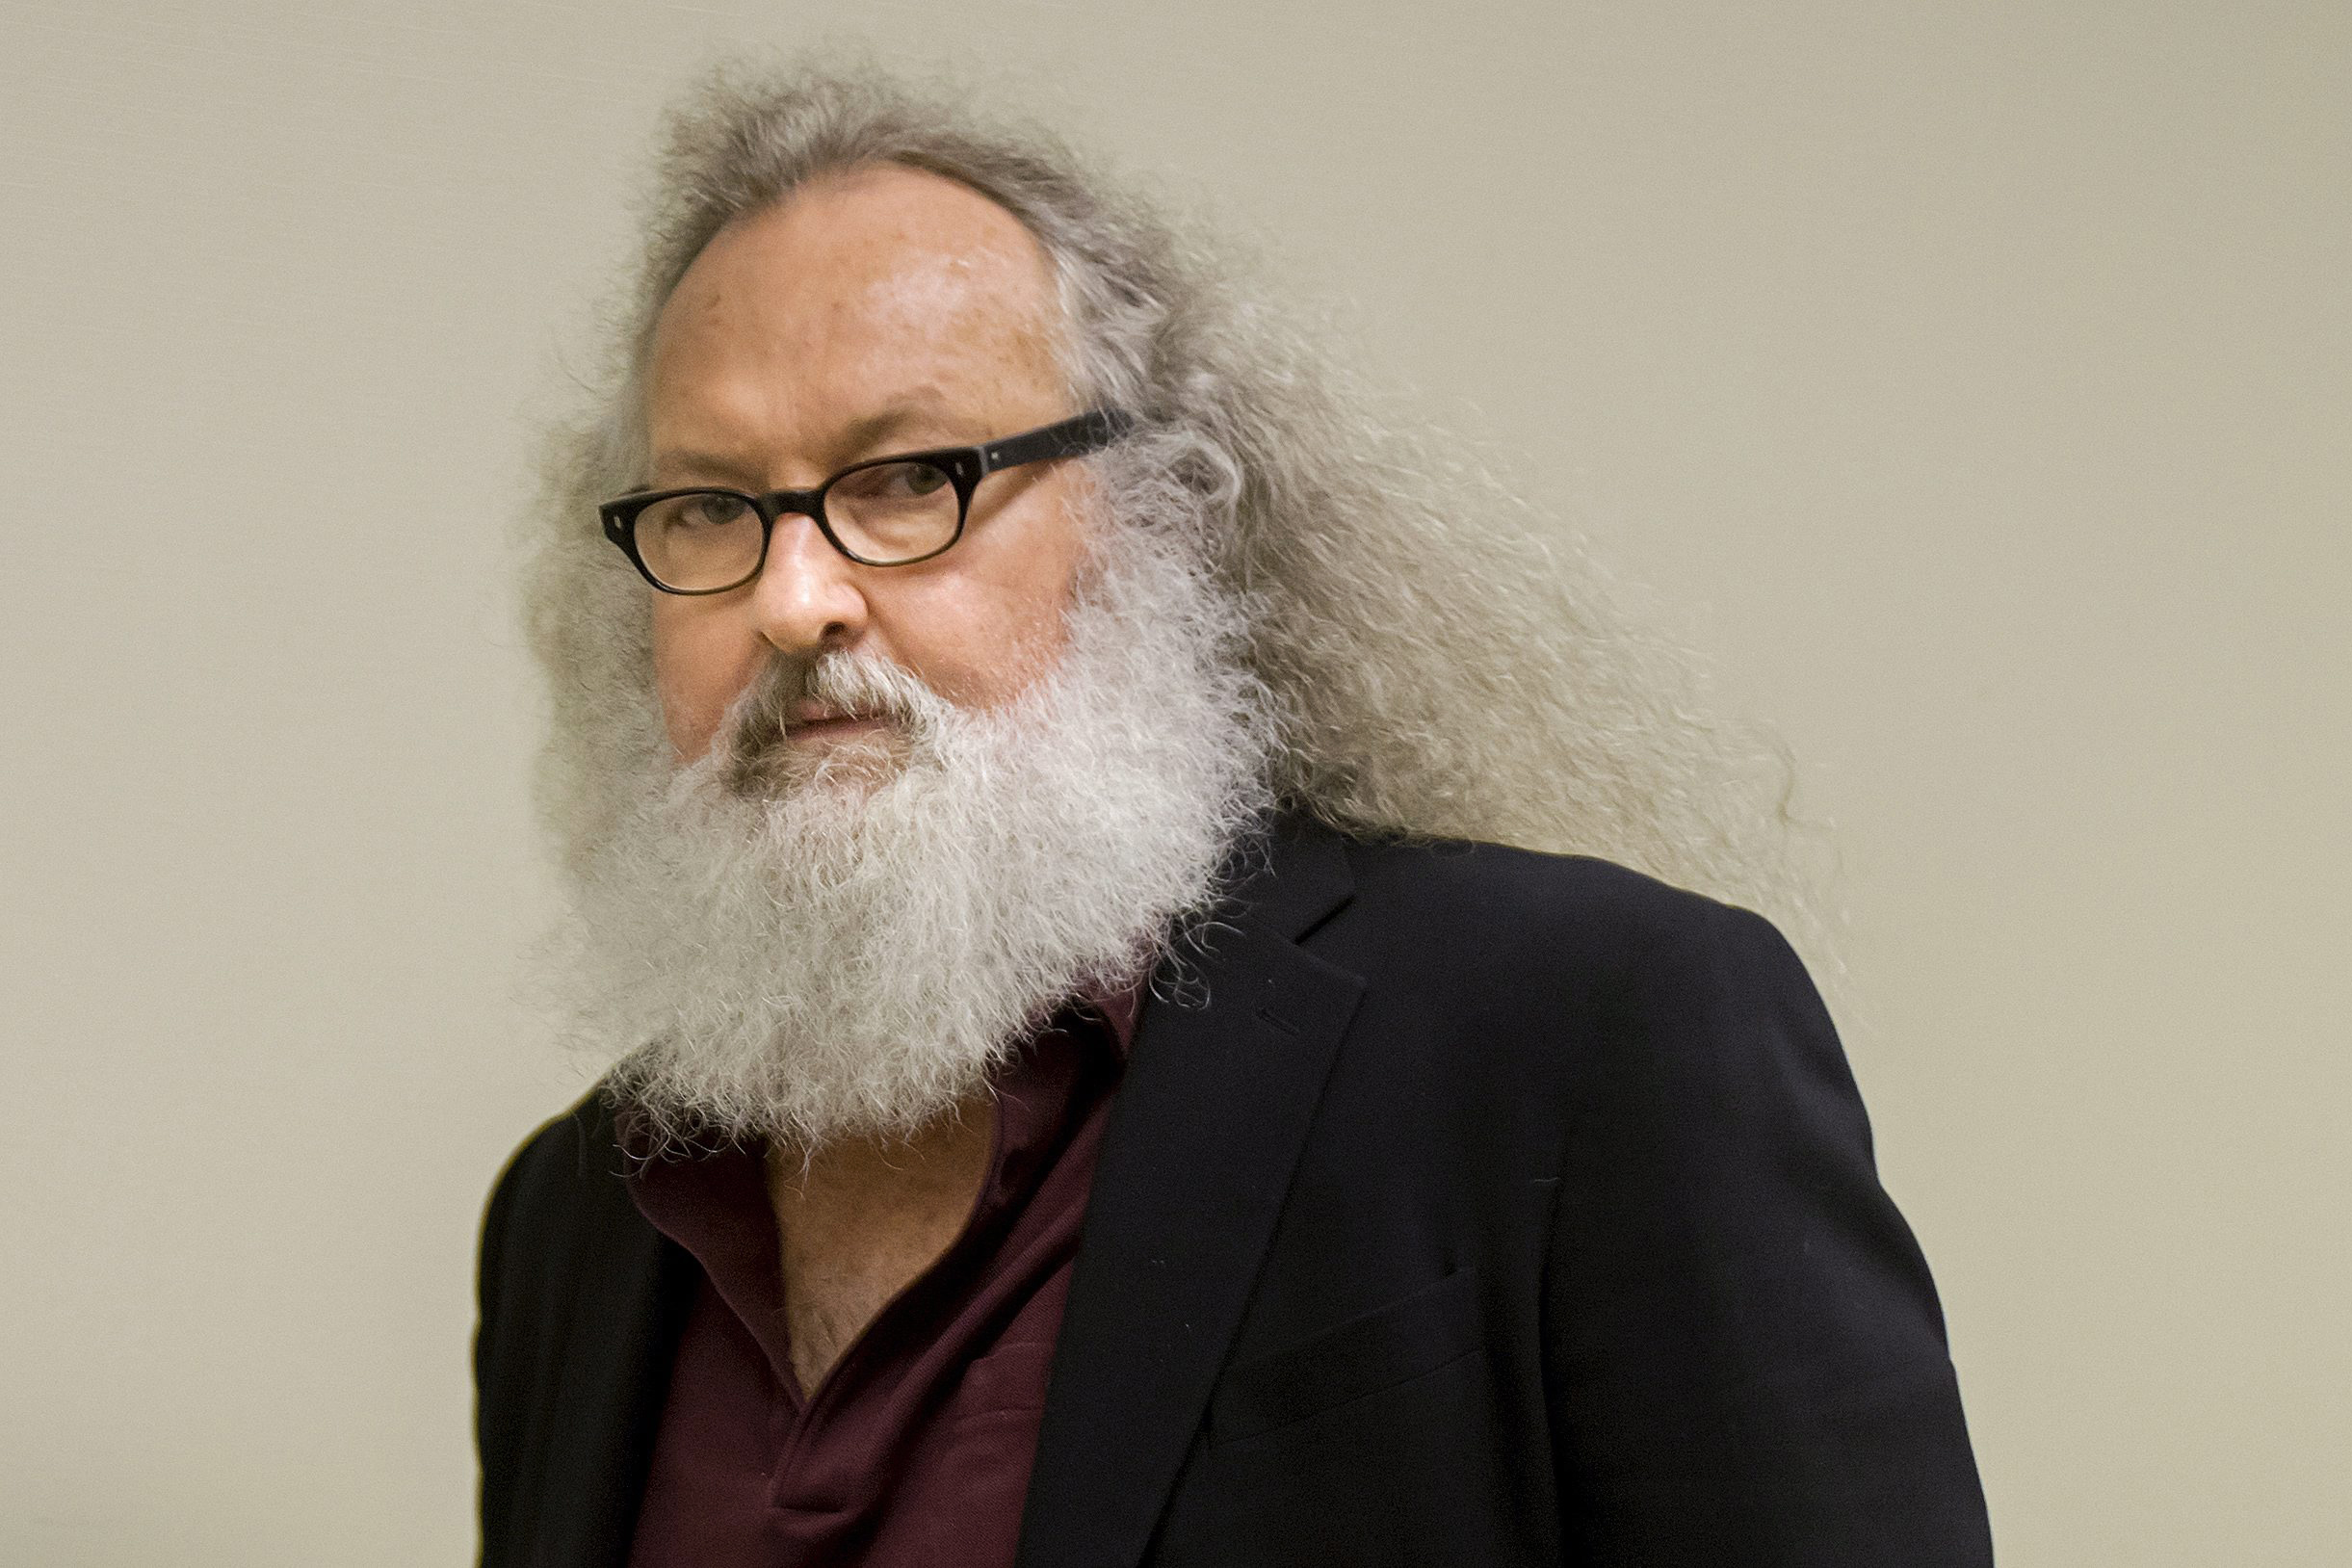 Randy Quaid Affair, Height, Net Worth, Age, Career, and More